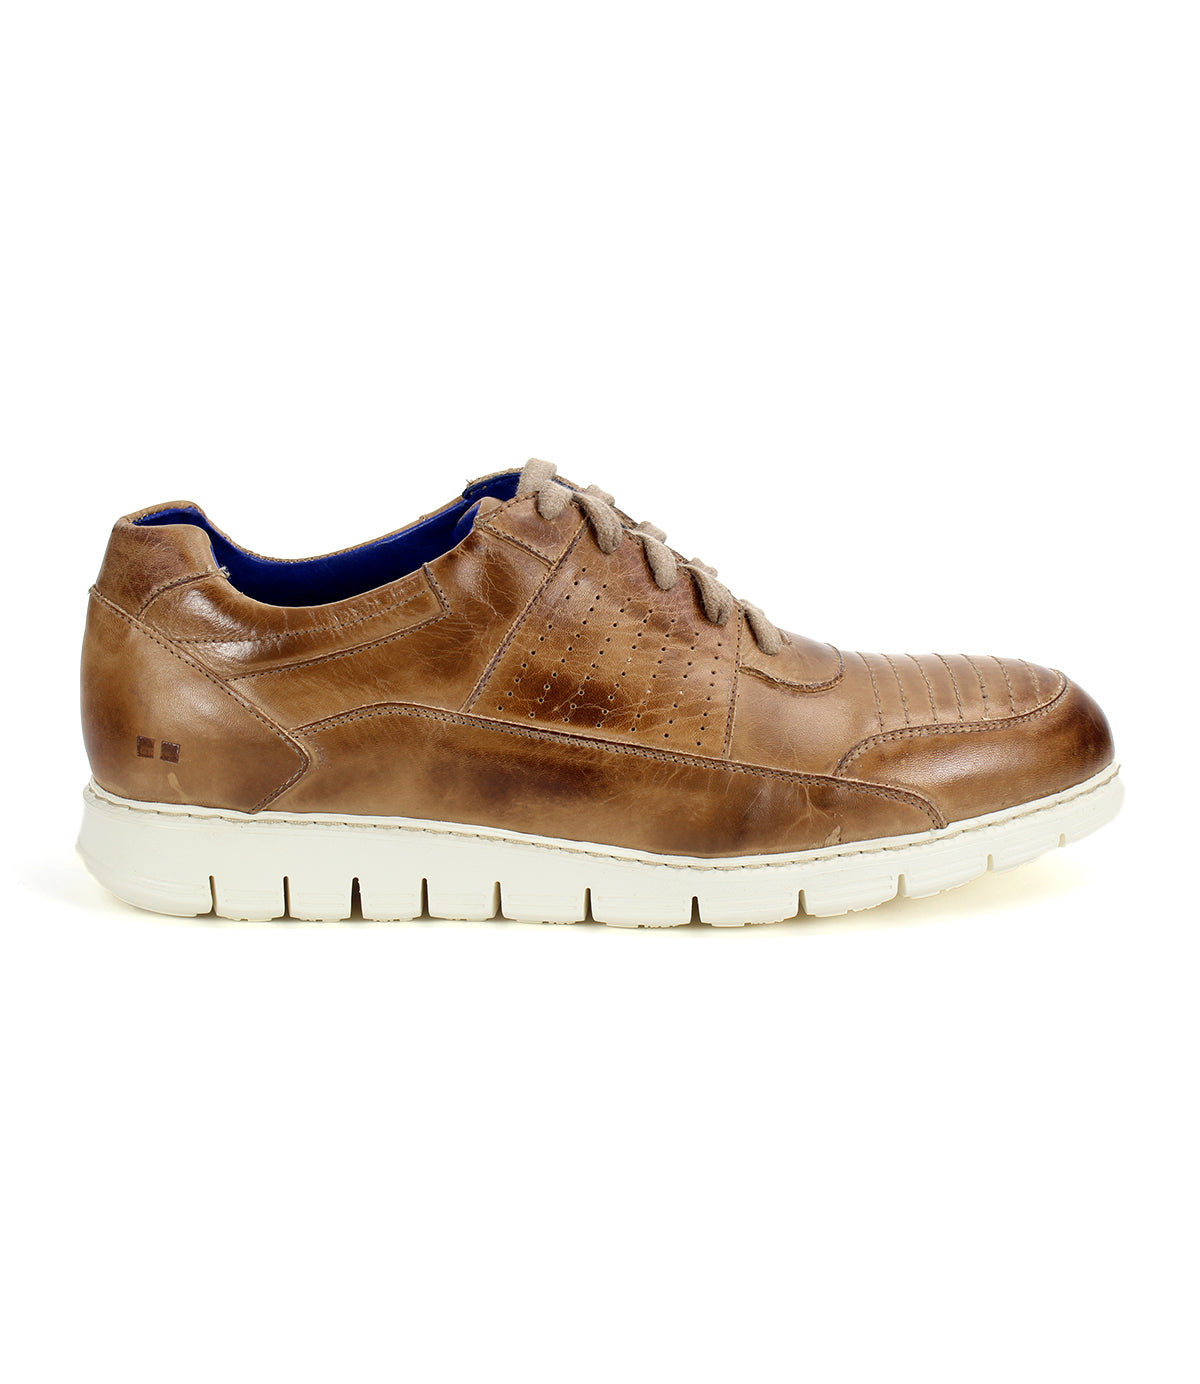 A low-top men's Fairman brown leather lace up shoe by Bed Stu.